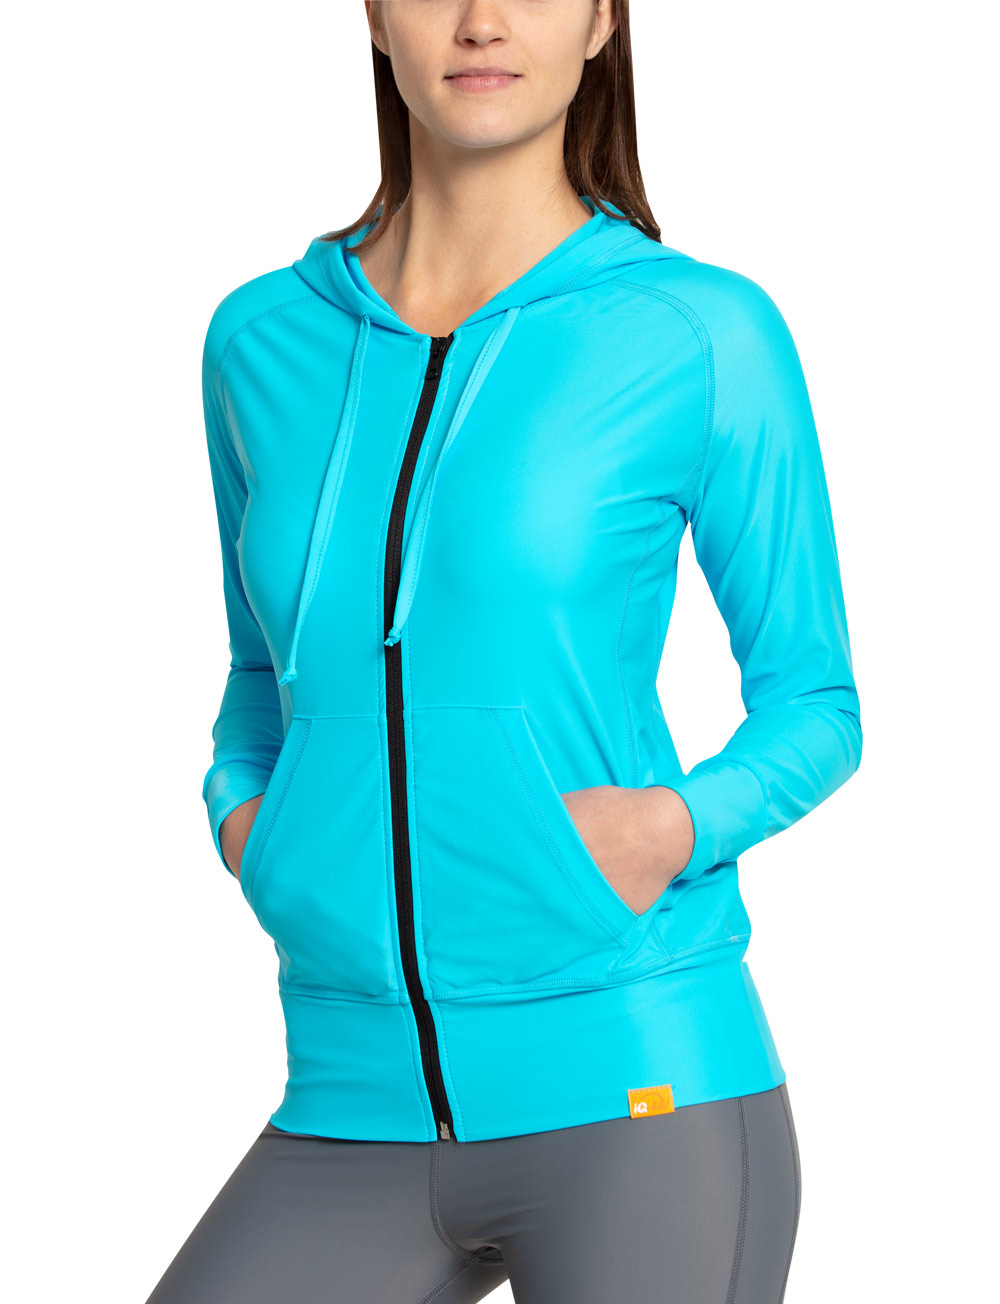 Lightweight Leisure Hooded Jacket for Women with Sun Protection